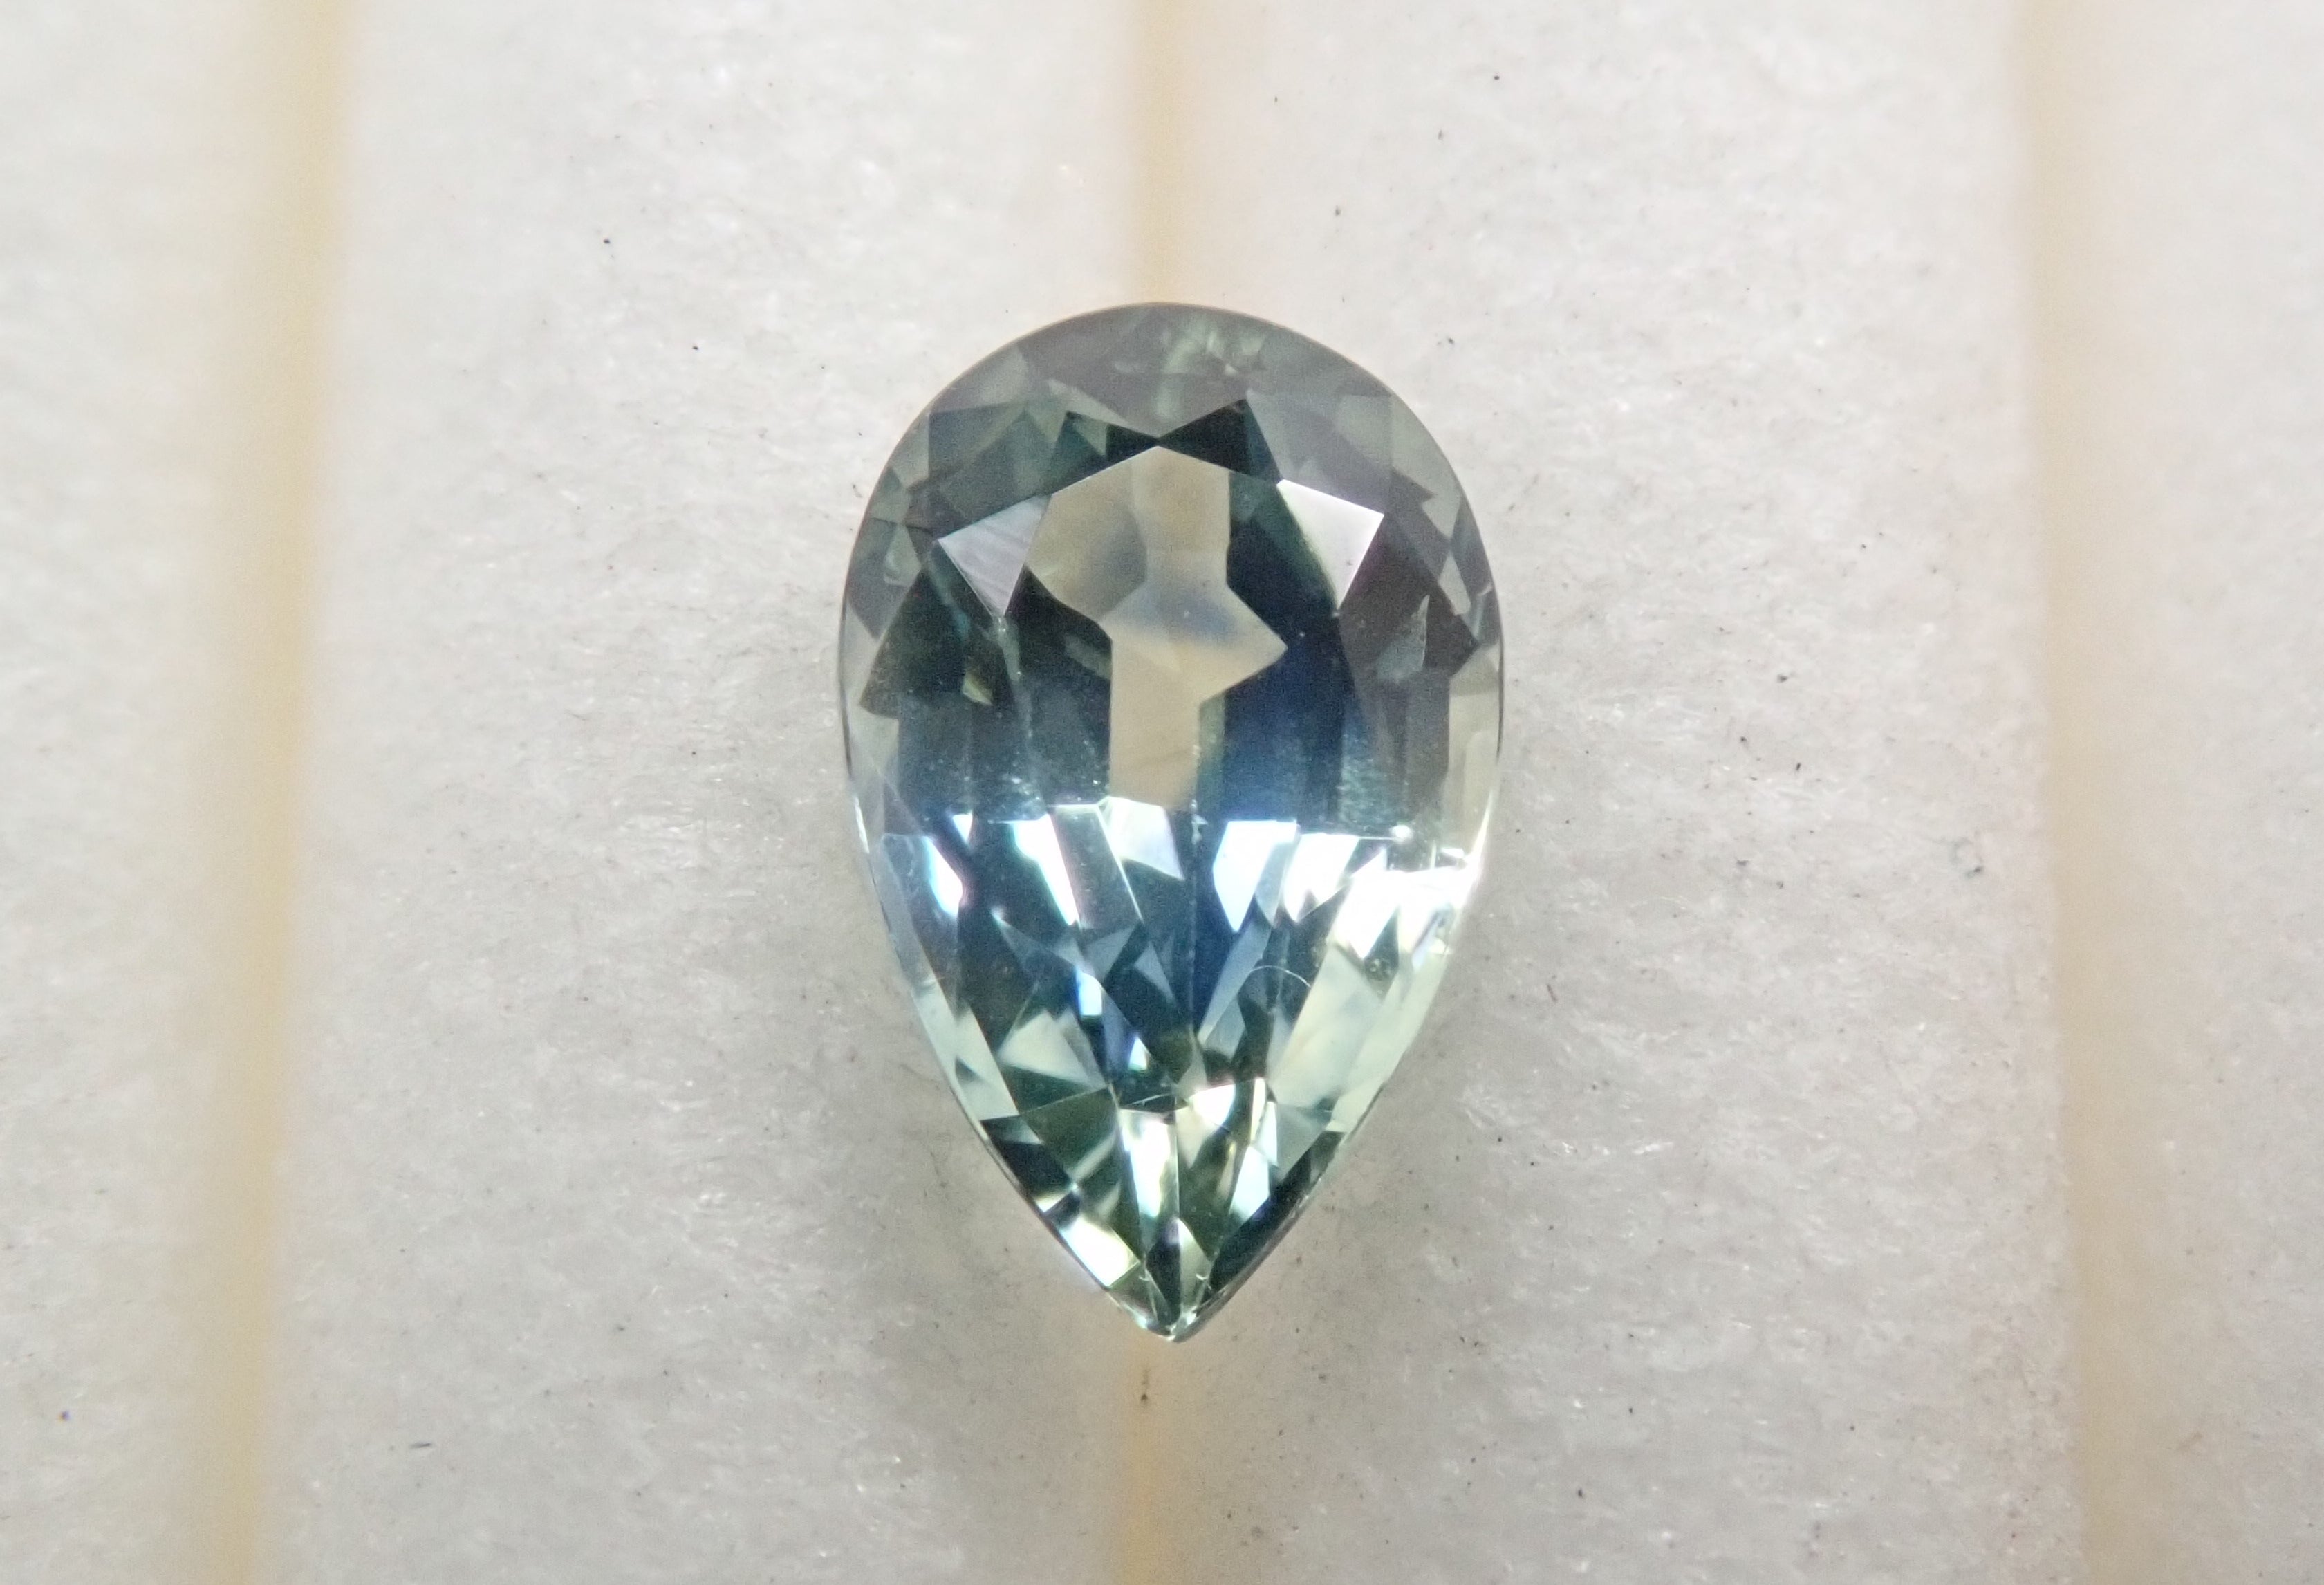 [On sale from 10pm on August 1st] Montana Sapphire 0.261ct Loose (Green Sapphire)